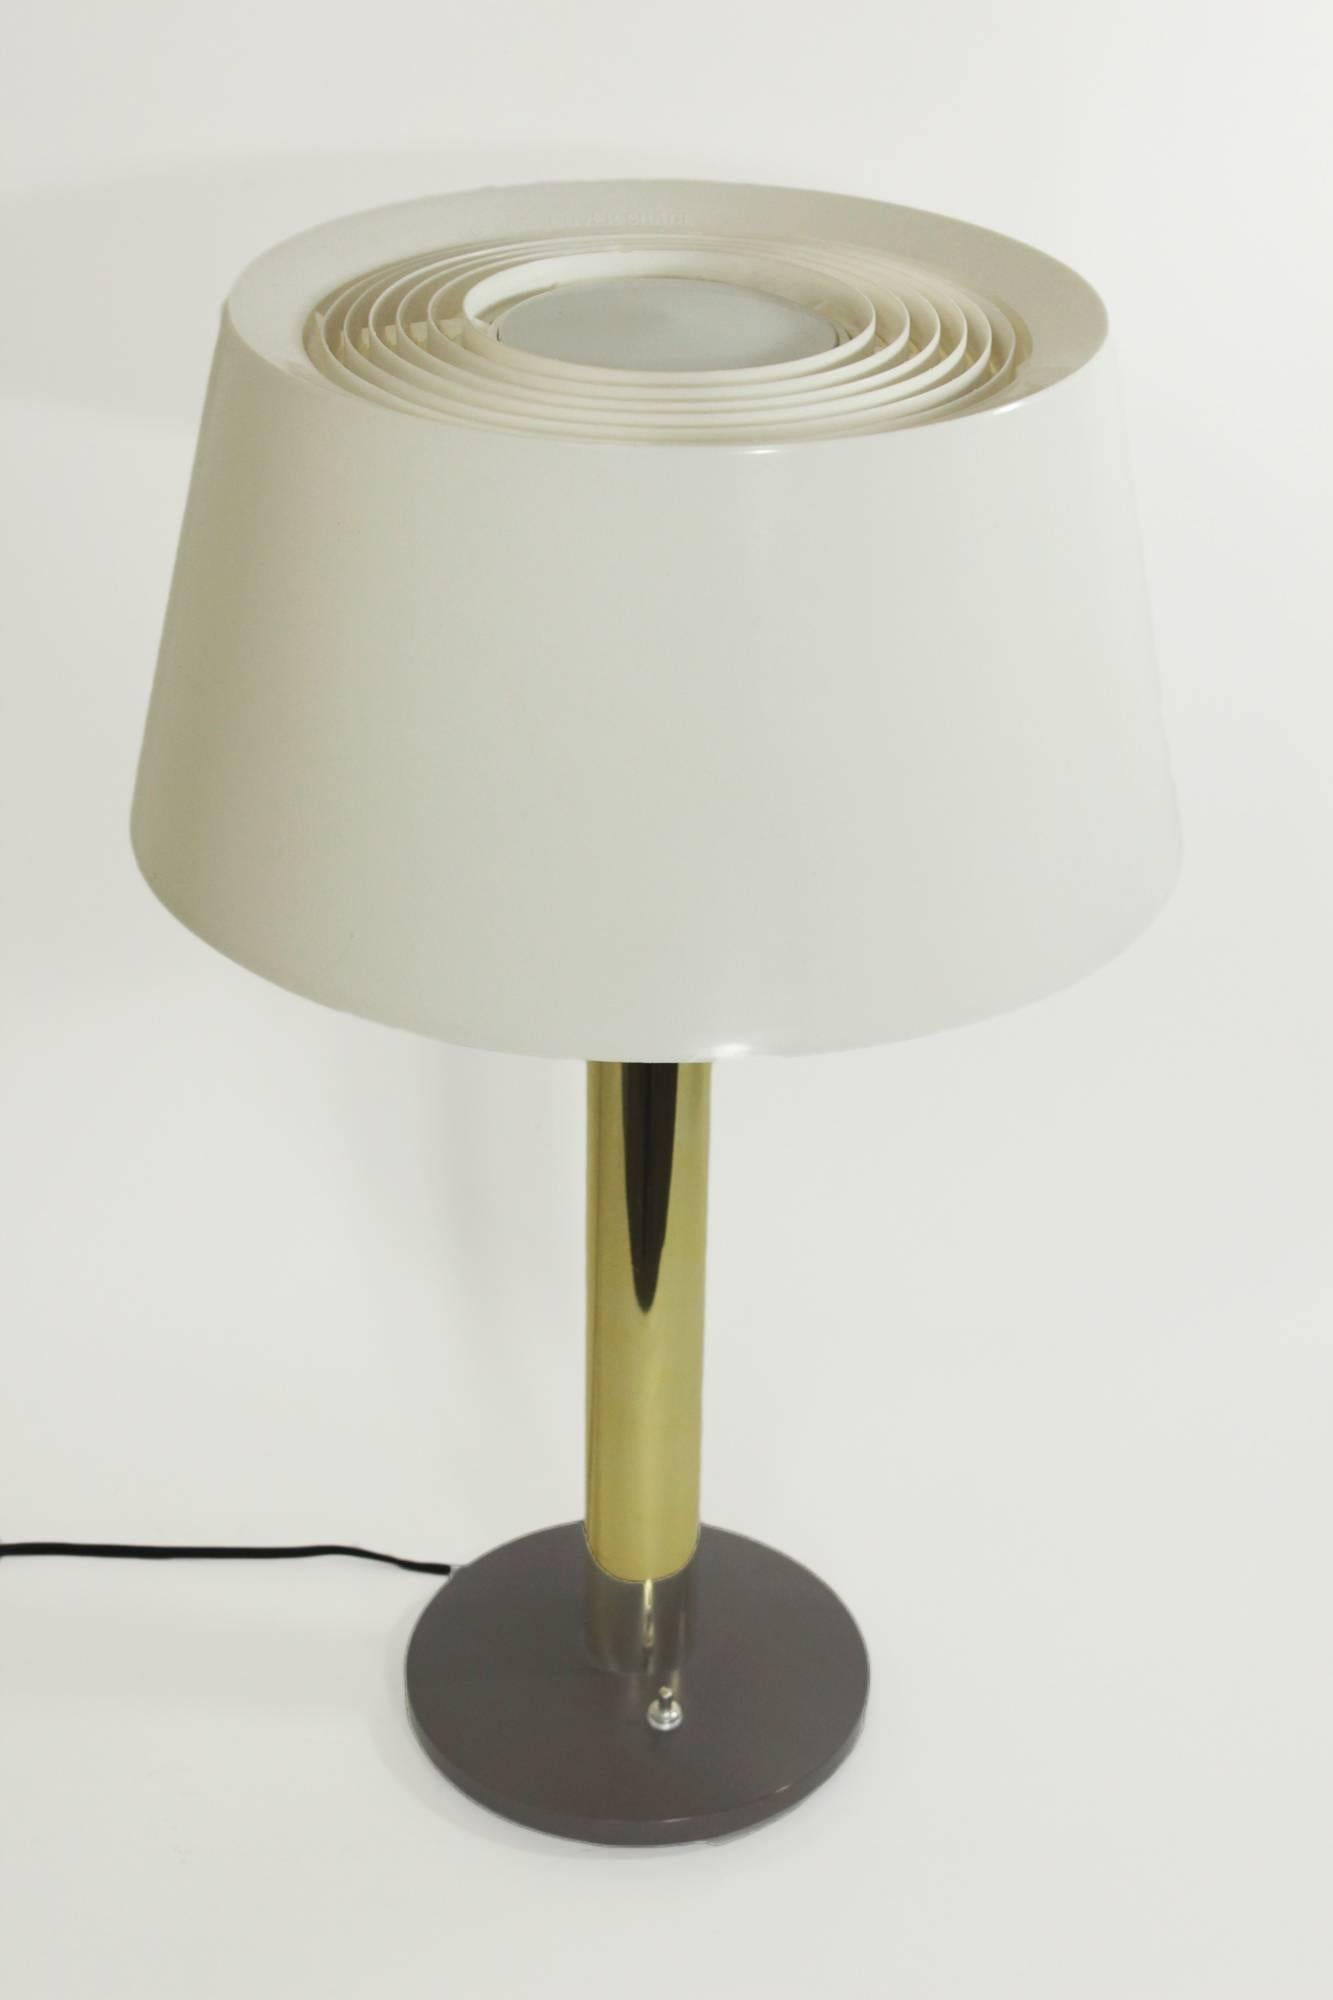 Clean modern lines and minimal detail are the hallmarks of this Mid-Century table lamp designed by Gerald Thurston for Lightolier. Two pieces are available for sale. The lamp features the patented Lightolier vented plastic shade with a bobesche